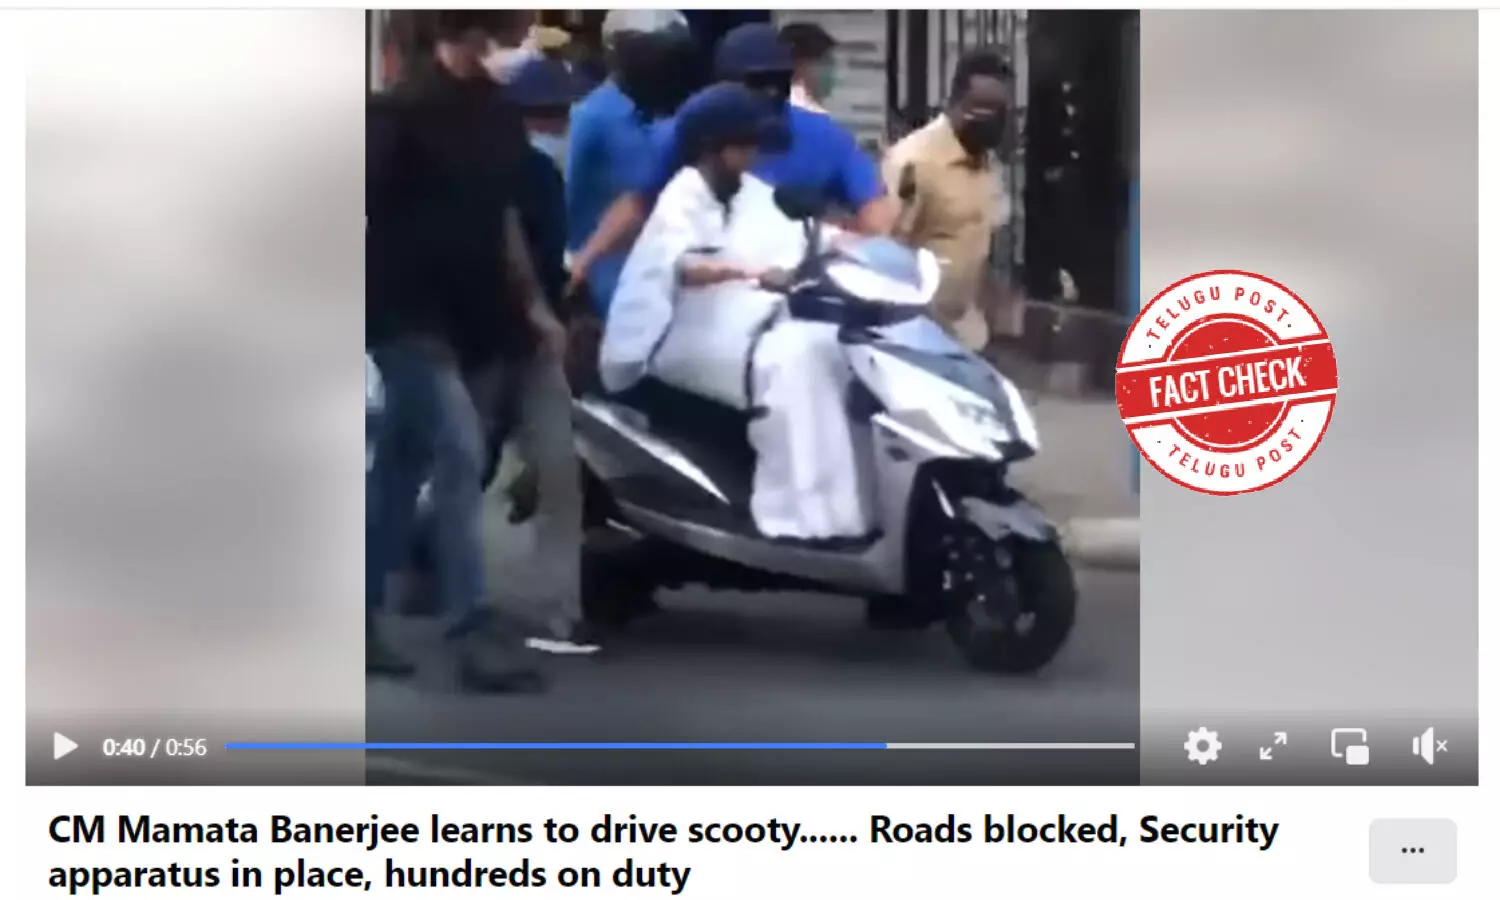 Mamata Benerjee riding a bike as part of protest in 2021 is shared with Misleading claim